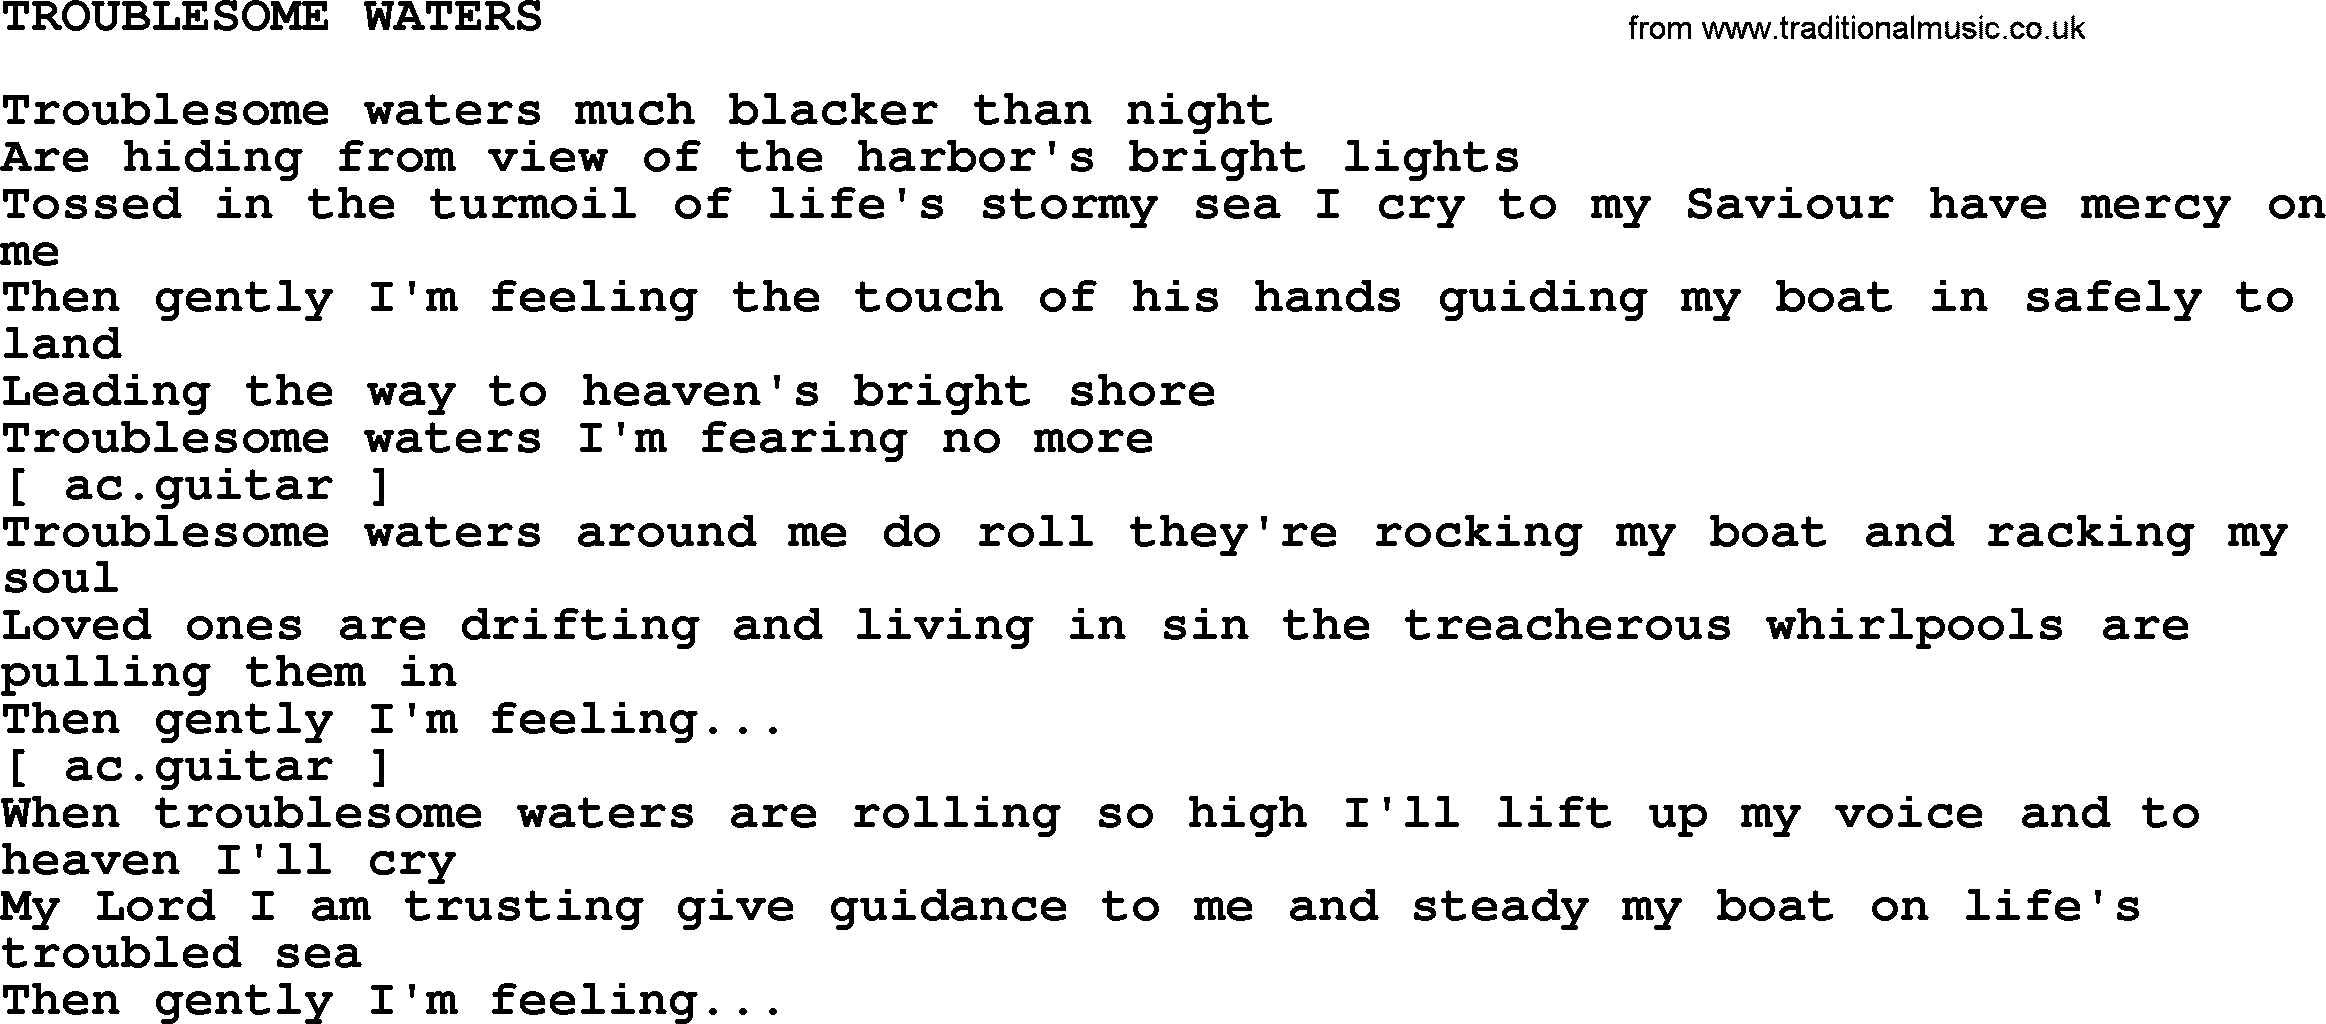 Johnny Cash song Troublesome Waters.txt lyrics